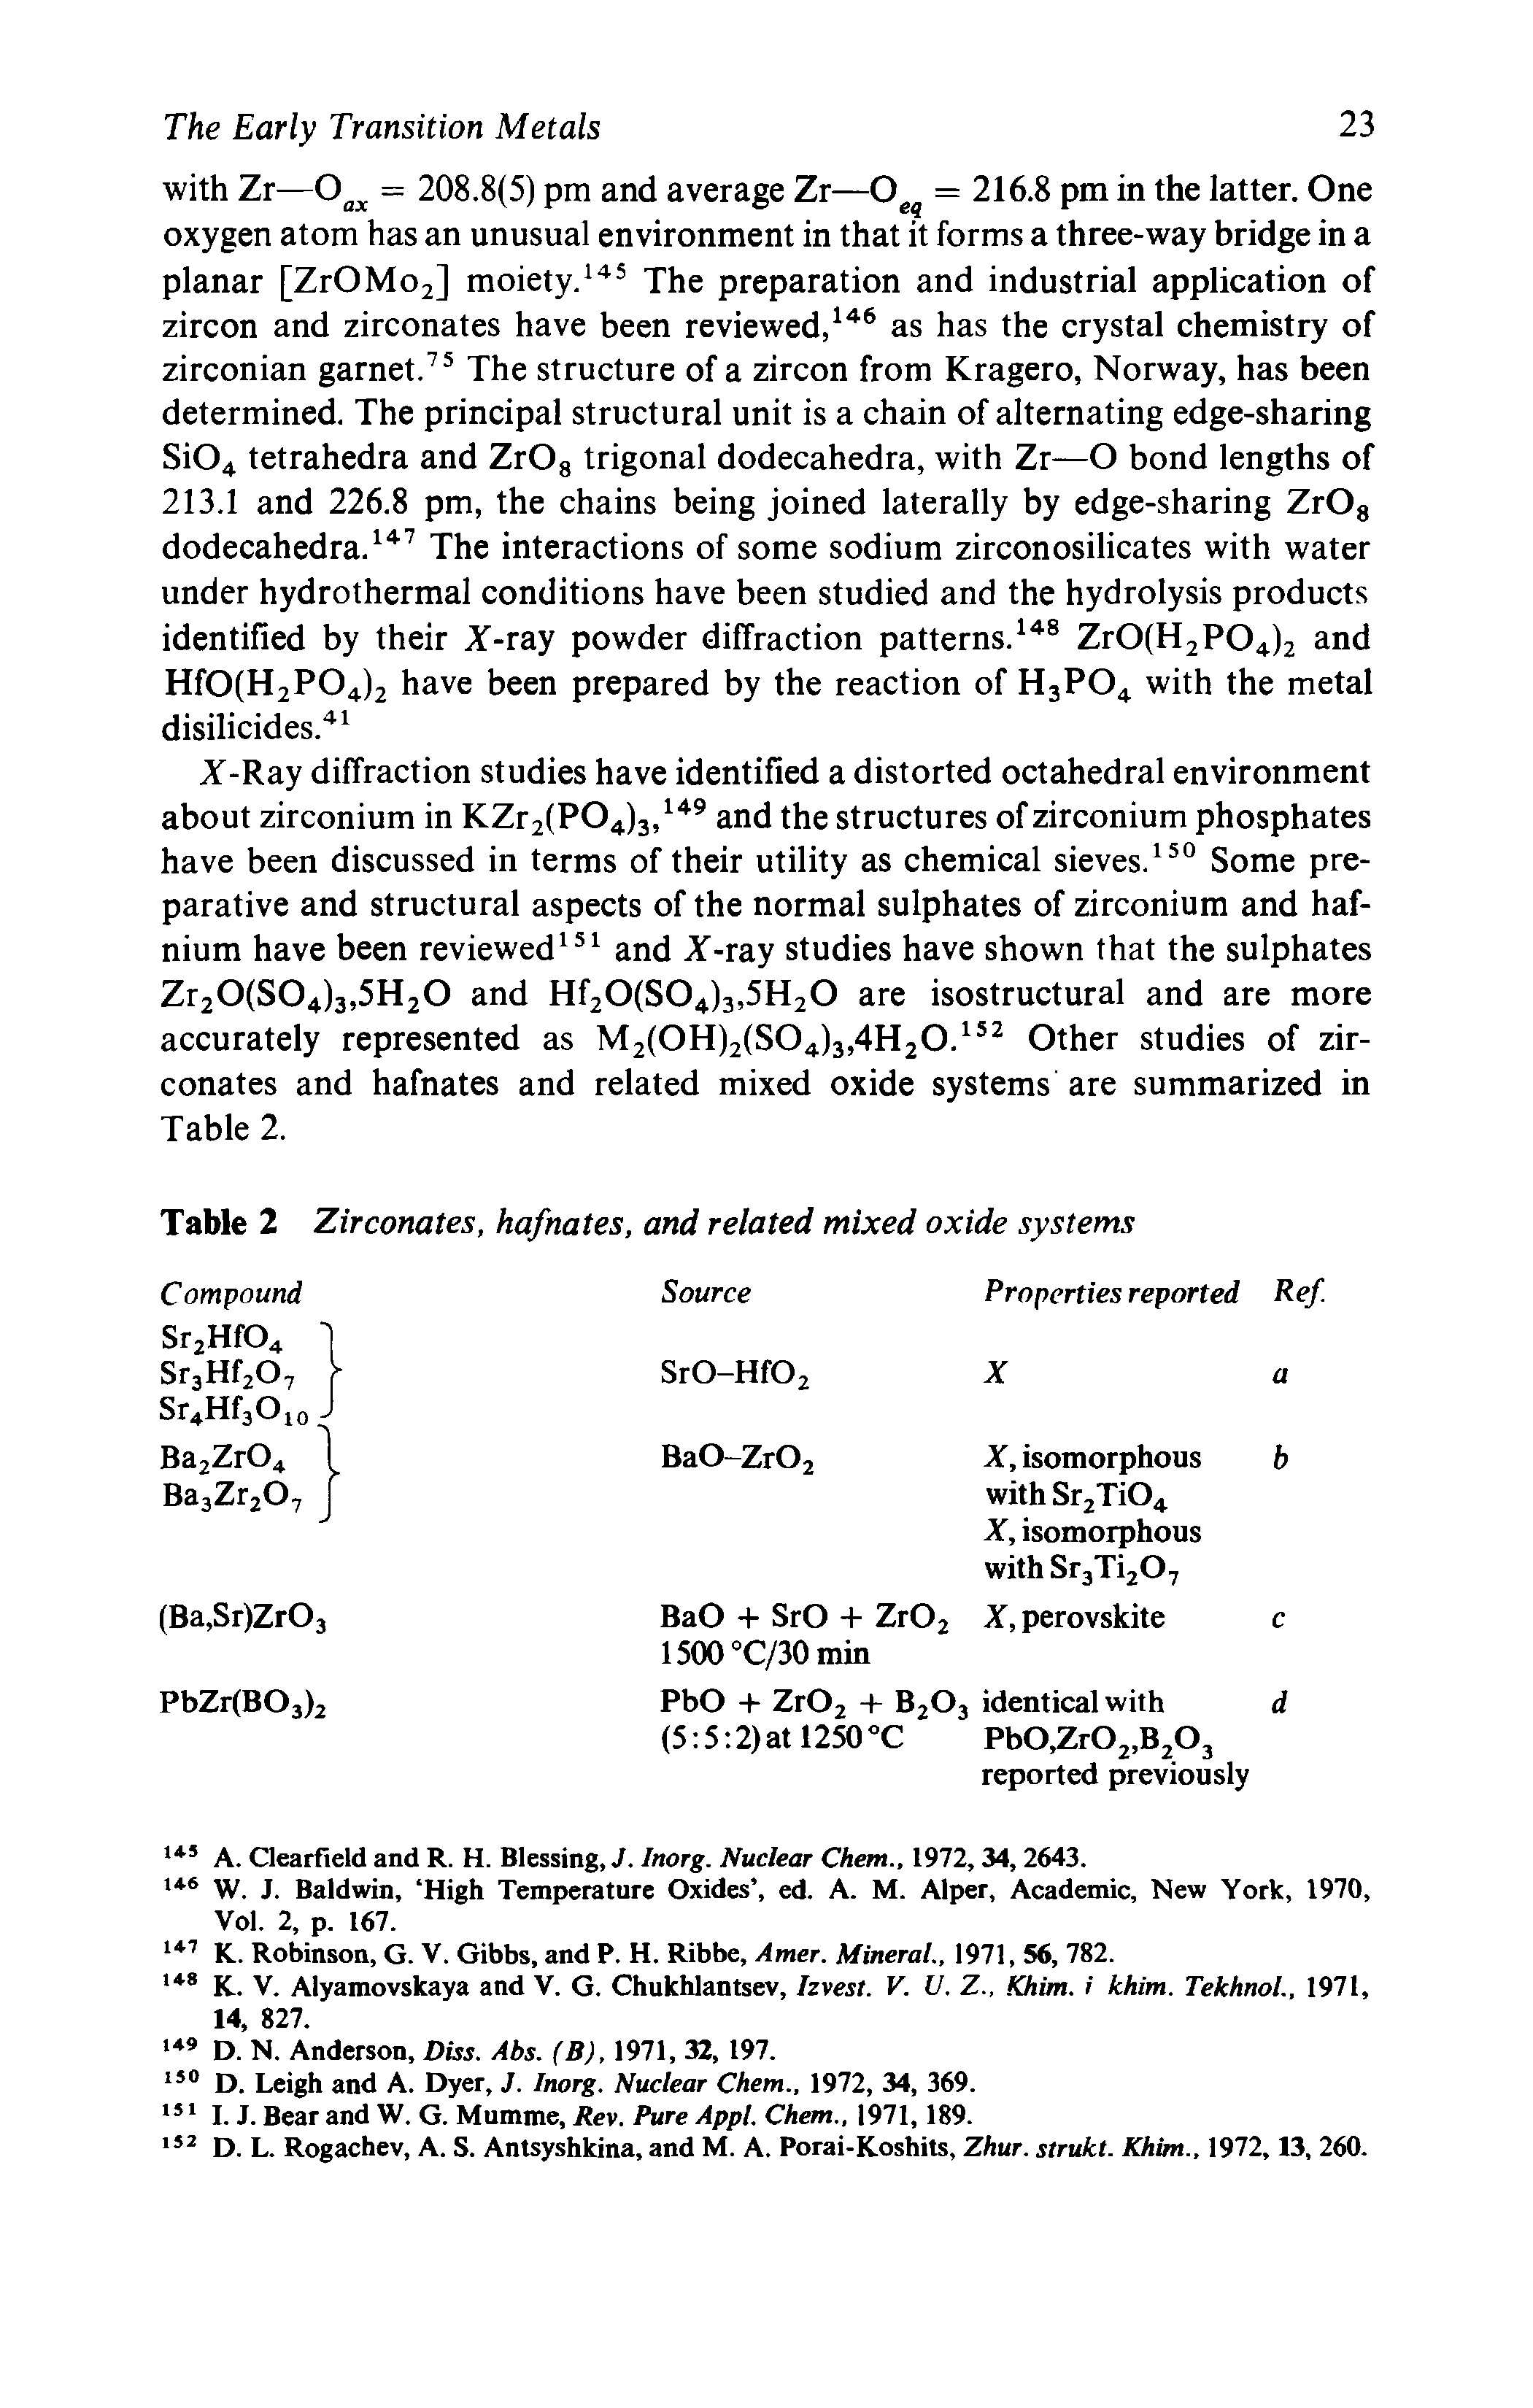 Table 2 Zirconates, hafnates, and related mixed oxide systems...